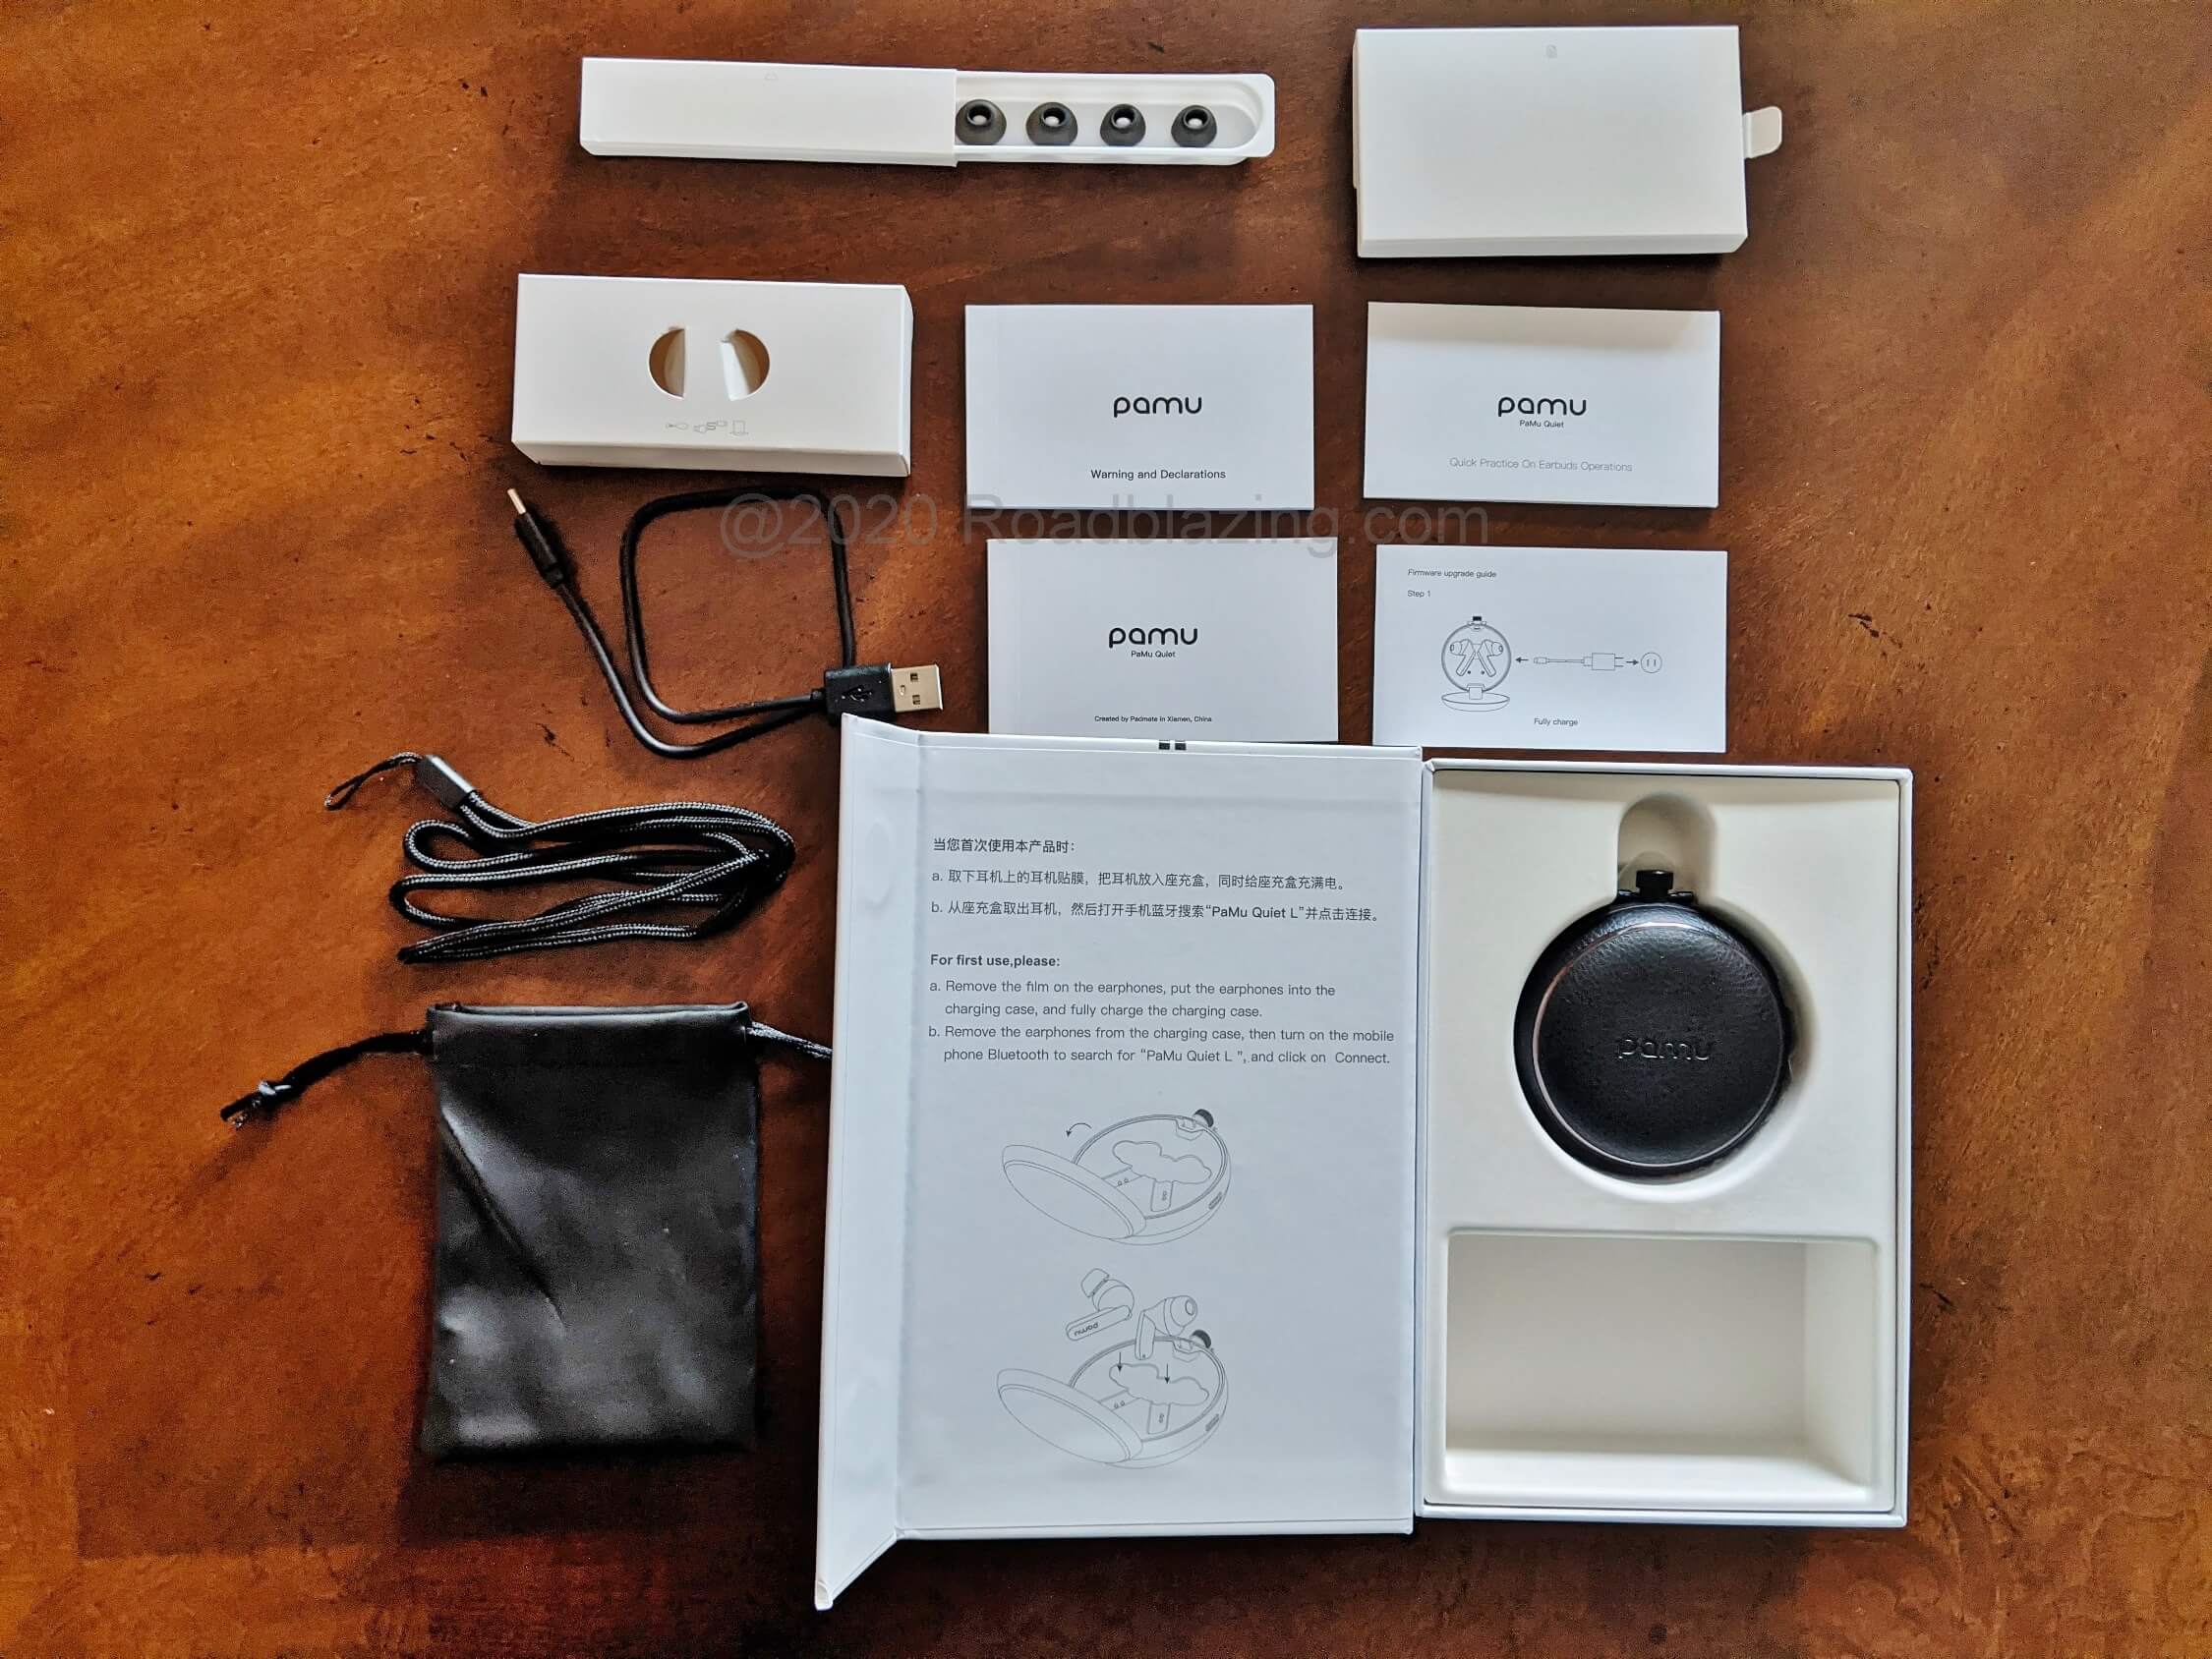 PaMu Quiet T10 noise cancelling wireless earphones: What's out of the box